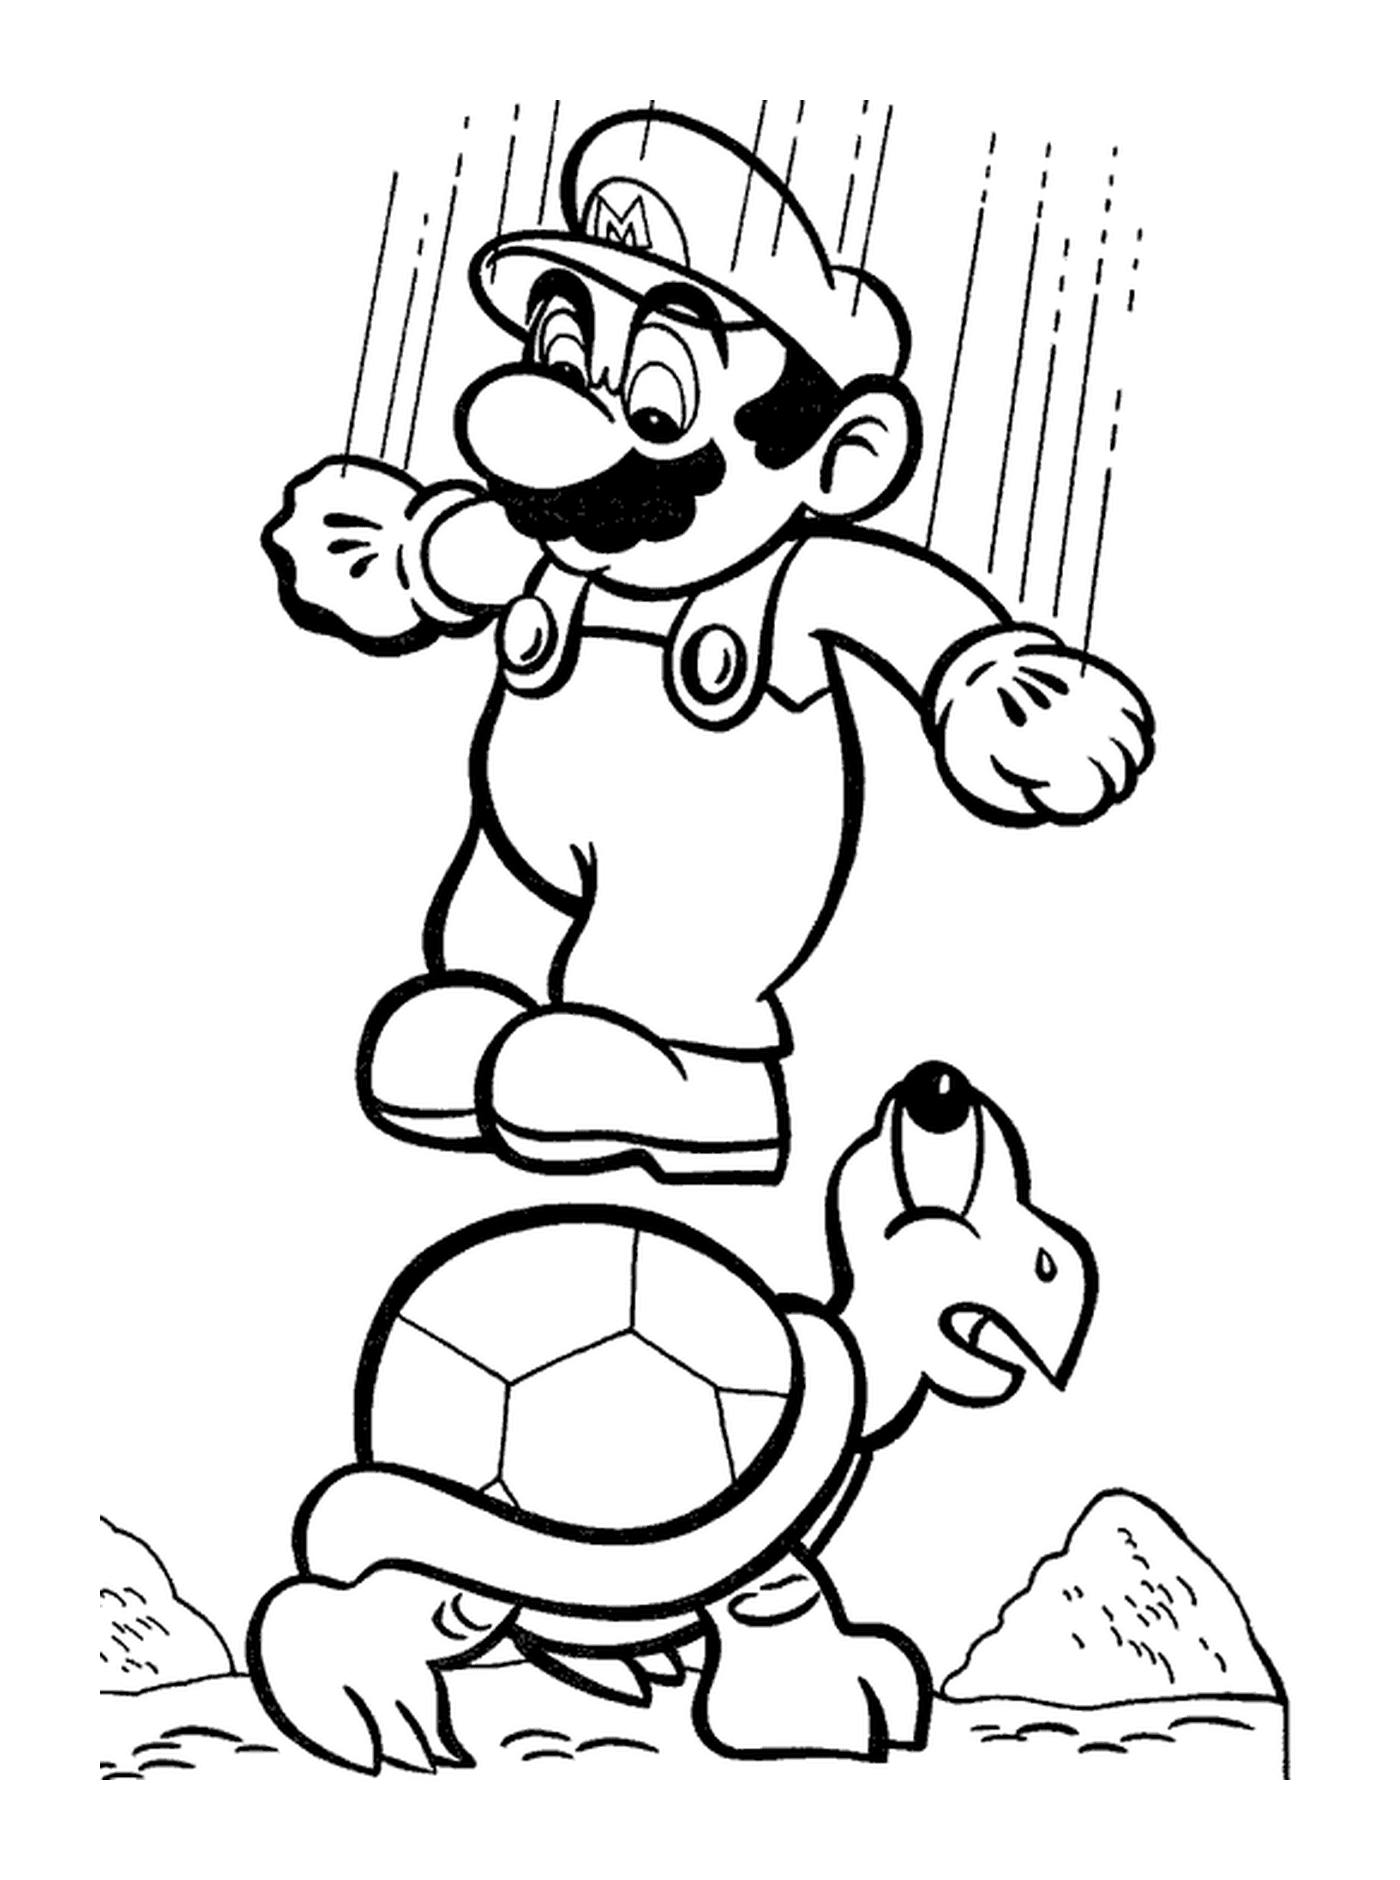  Mario jumps on a turtle playing soccer 